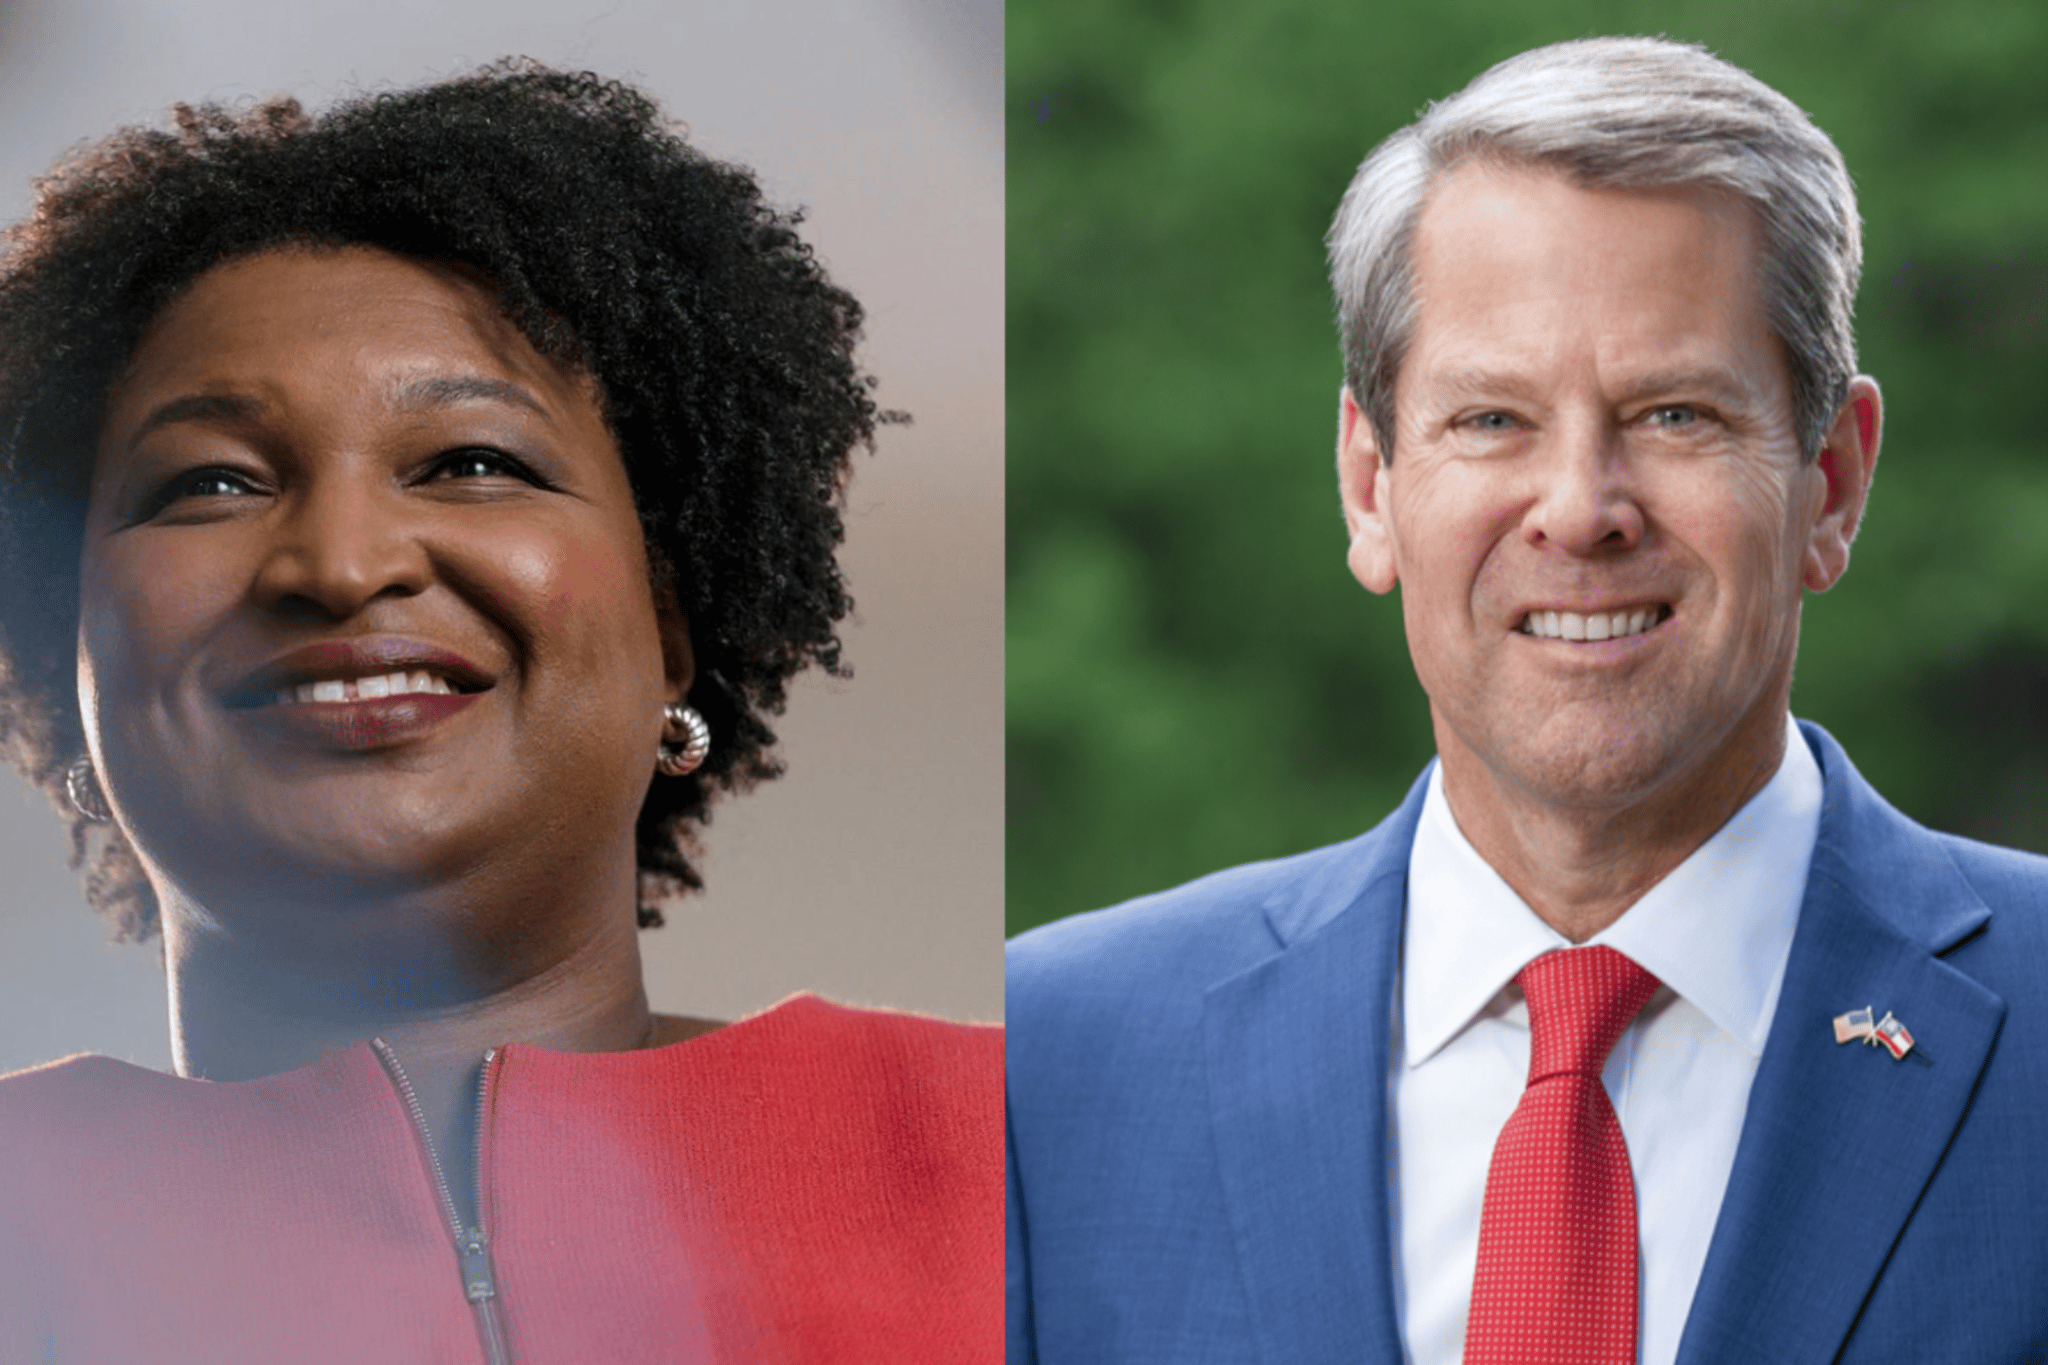 Georgia Voter Guide: Where do Brian Kemp and Stacey Abrams stand on key issues?